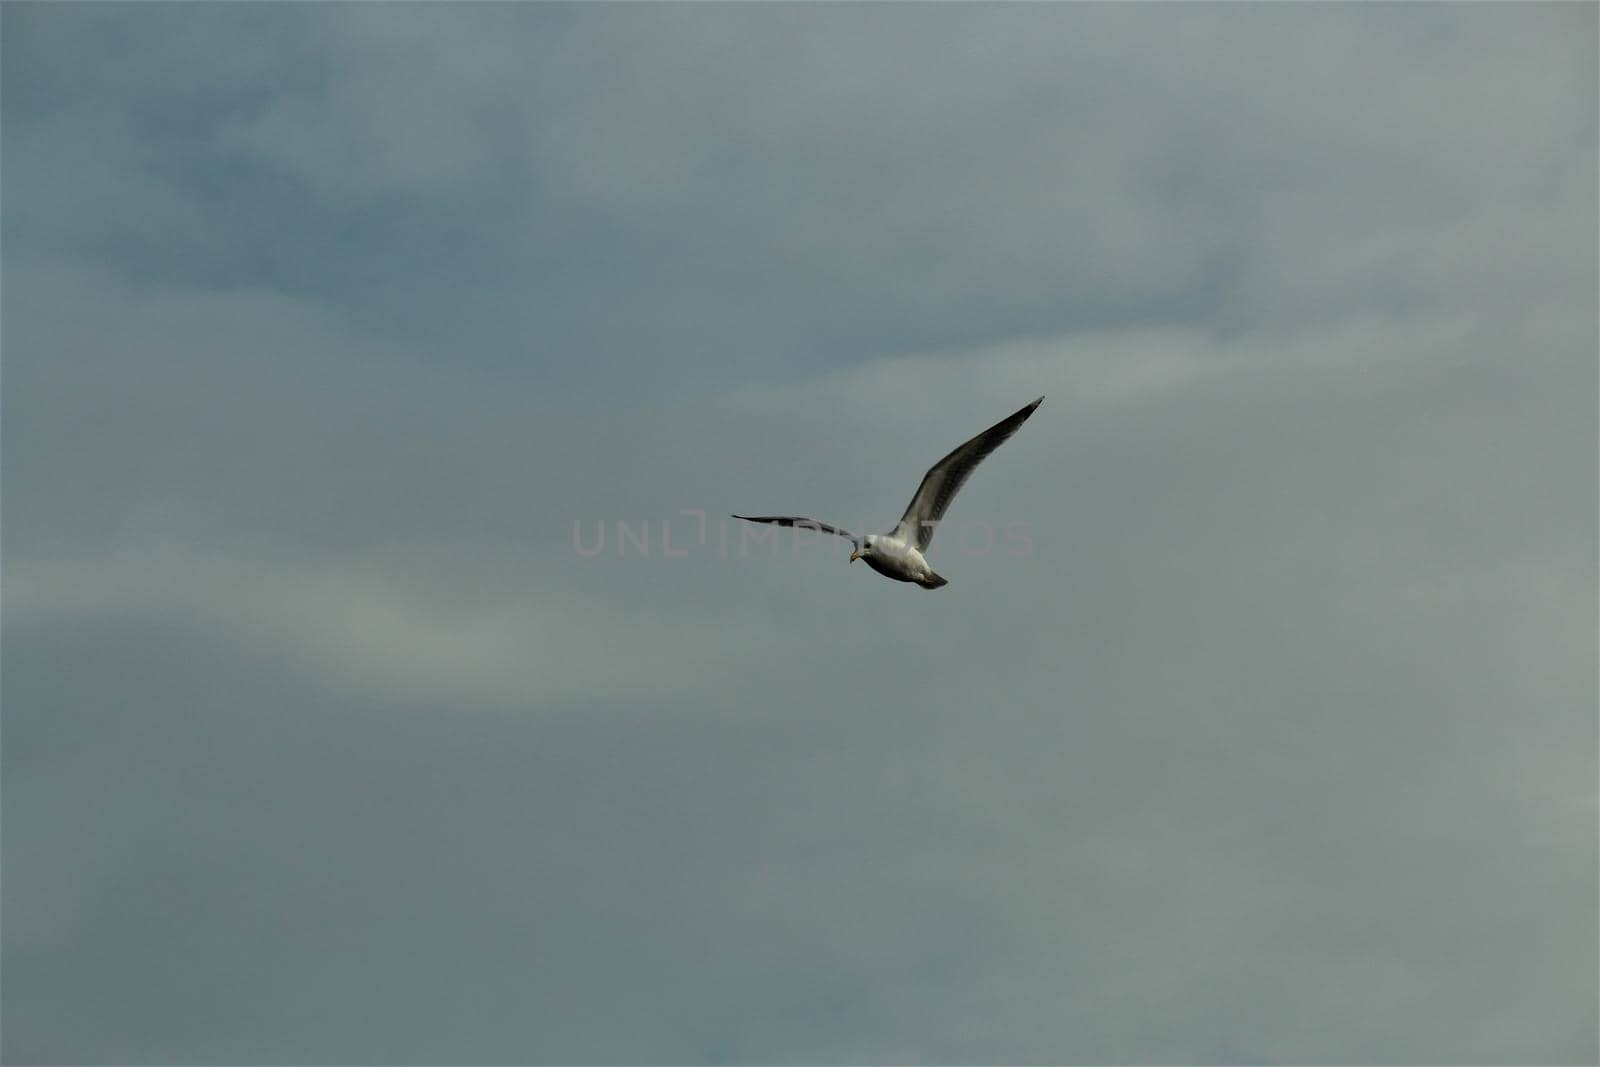 One seagull in flight aginst a cloudy sky by Luise123